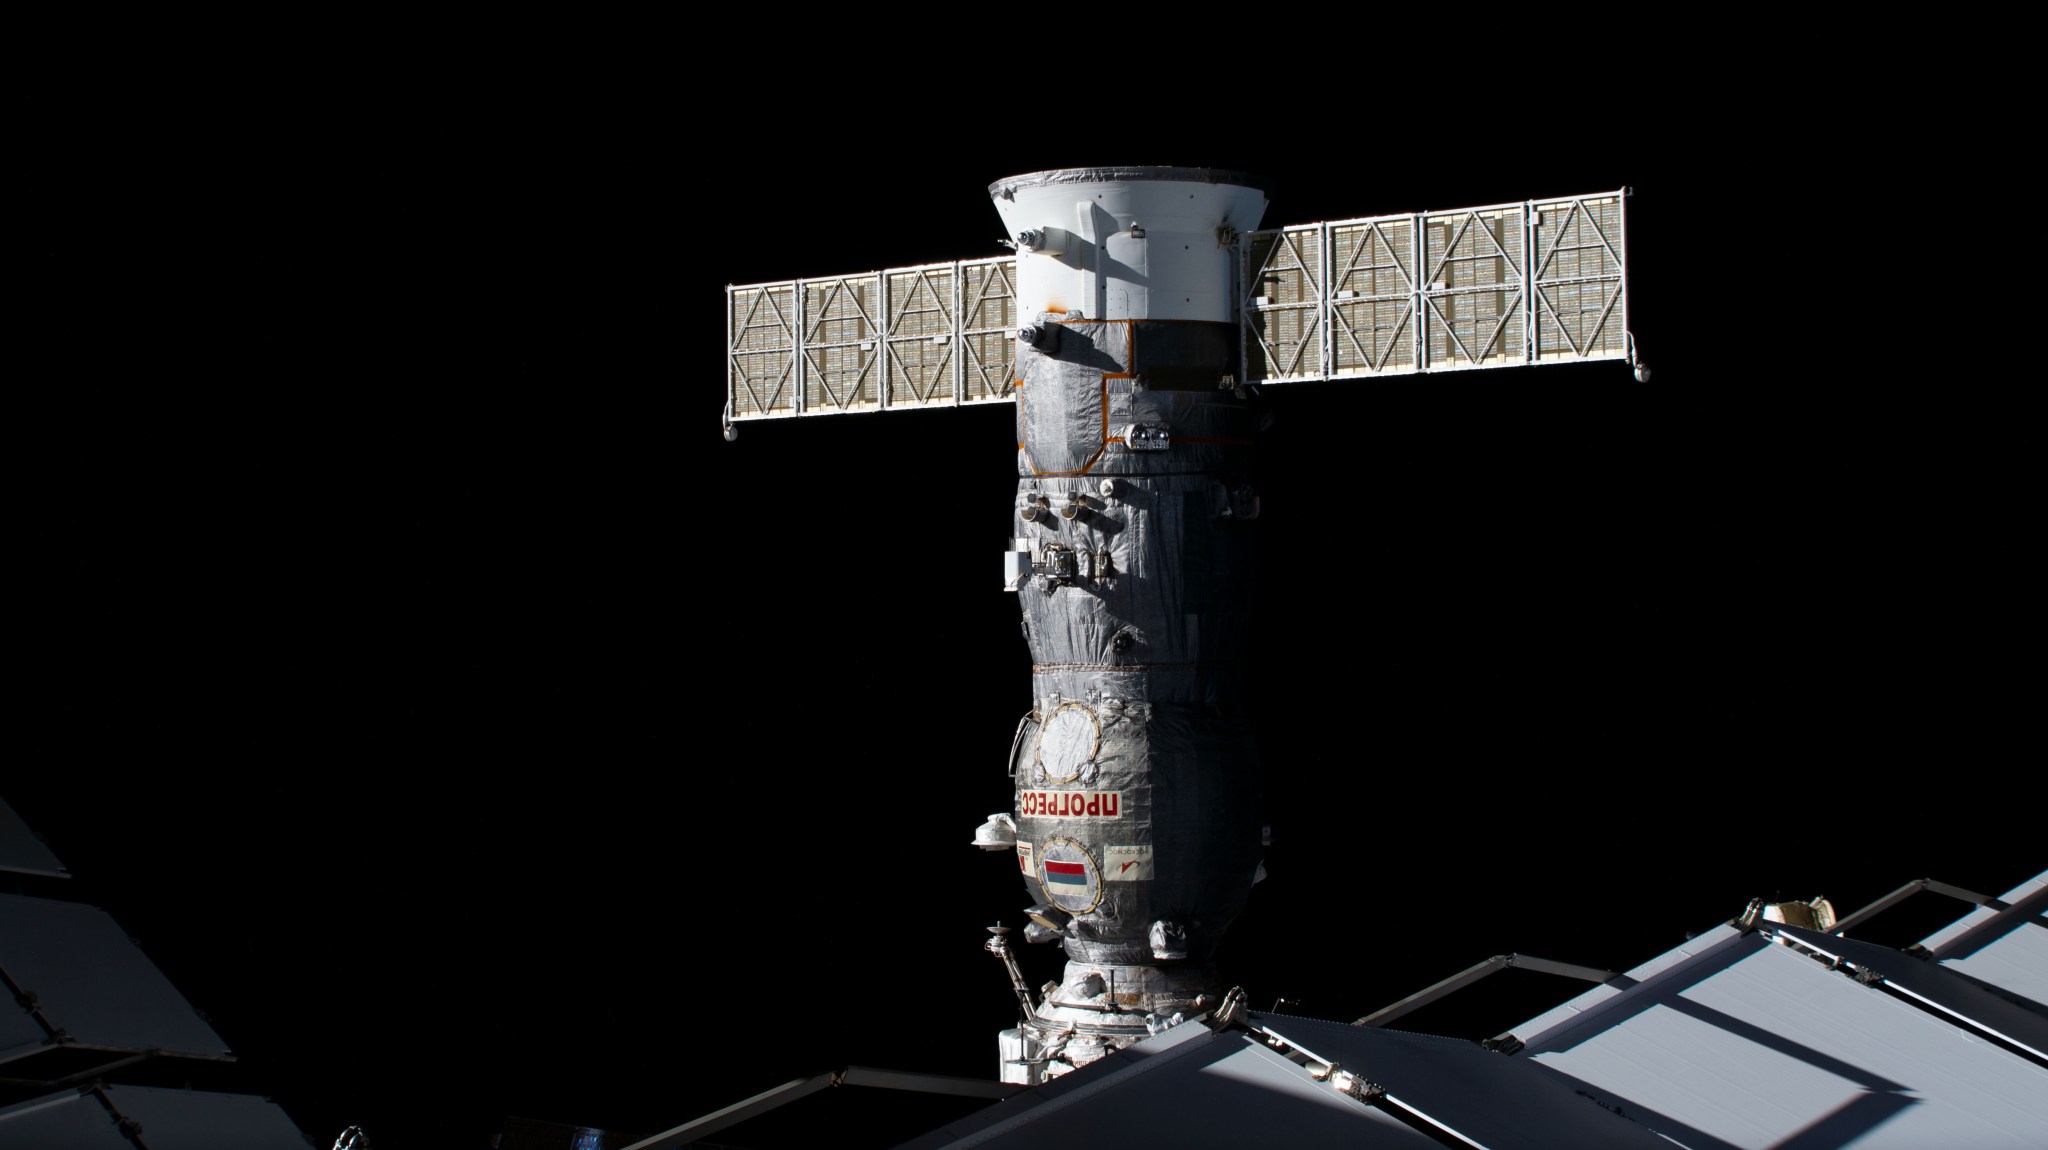 The Roscosmos Progress 84 cargo craft is pictured docked to the International Space Station's Poisk module.